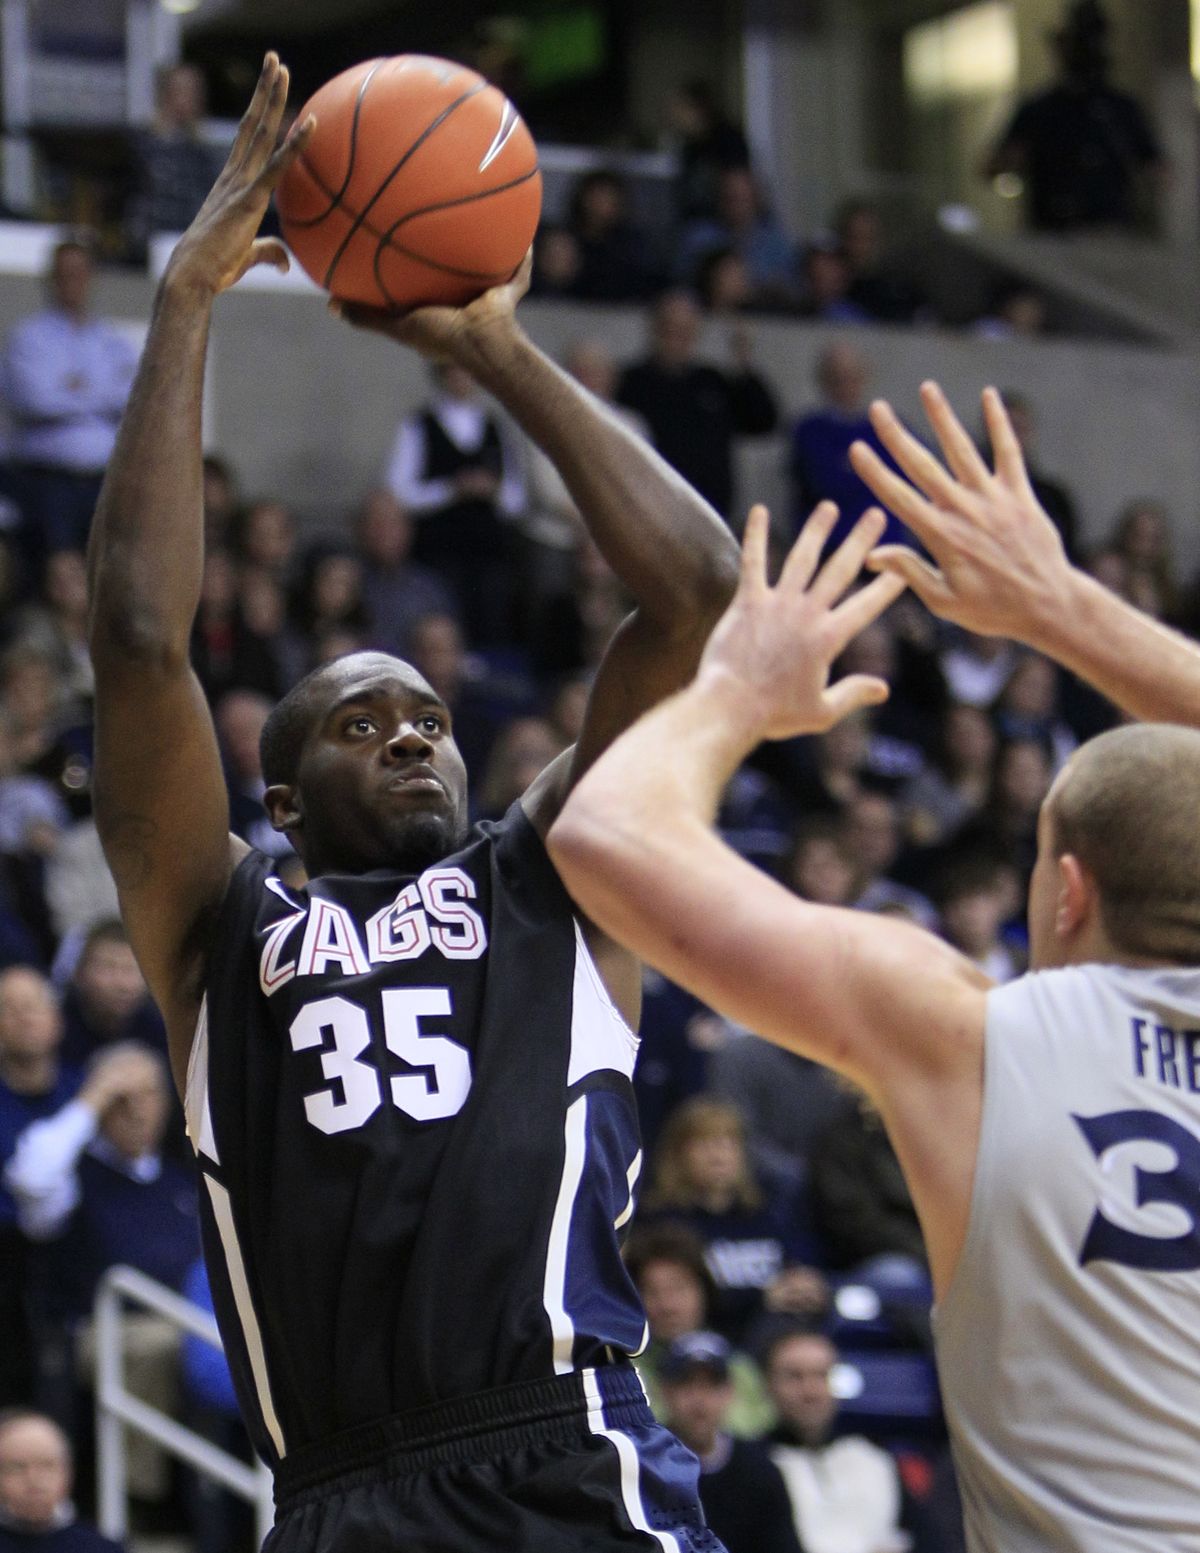 Gonzaga forward Sam Dower had 20 points and 10 rebounds against Xavier. (Associated Press)